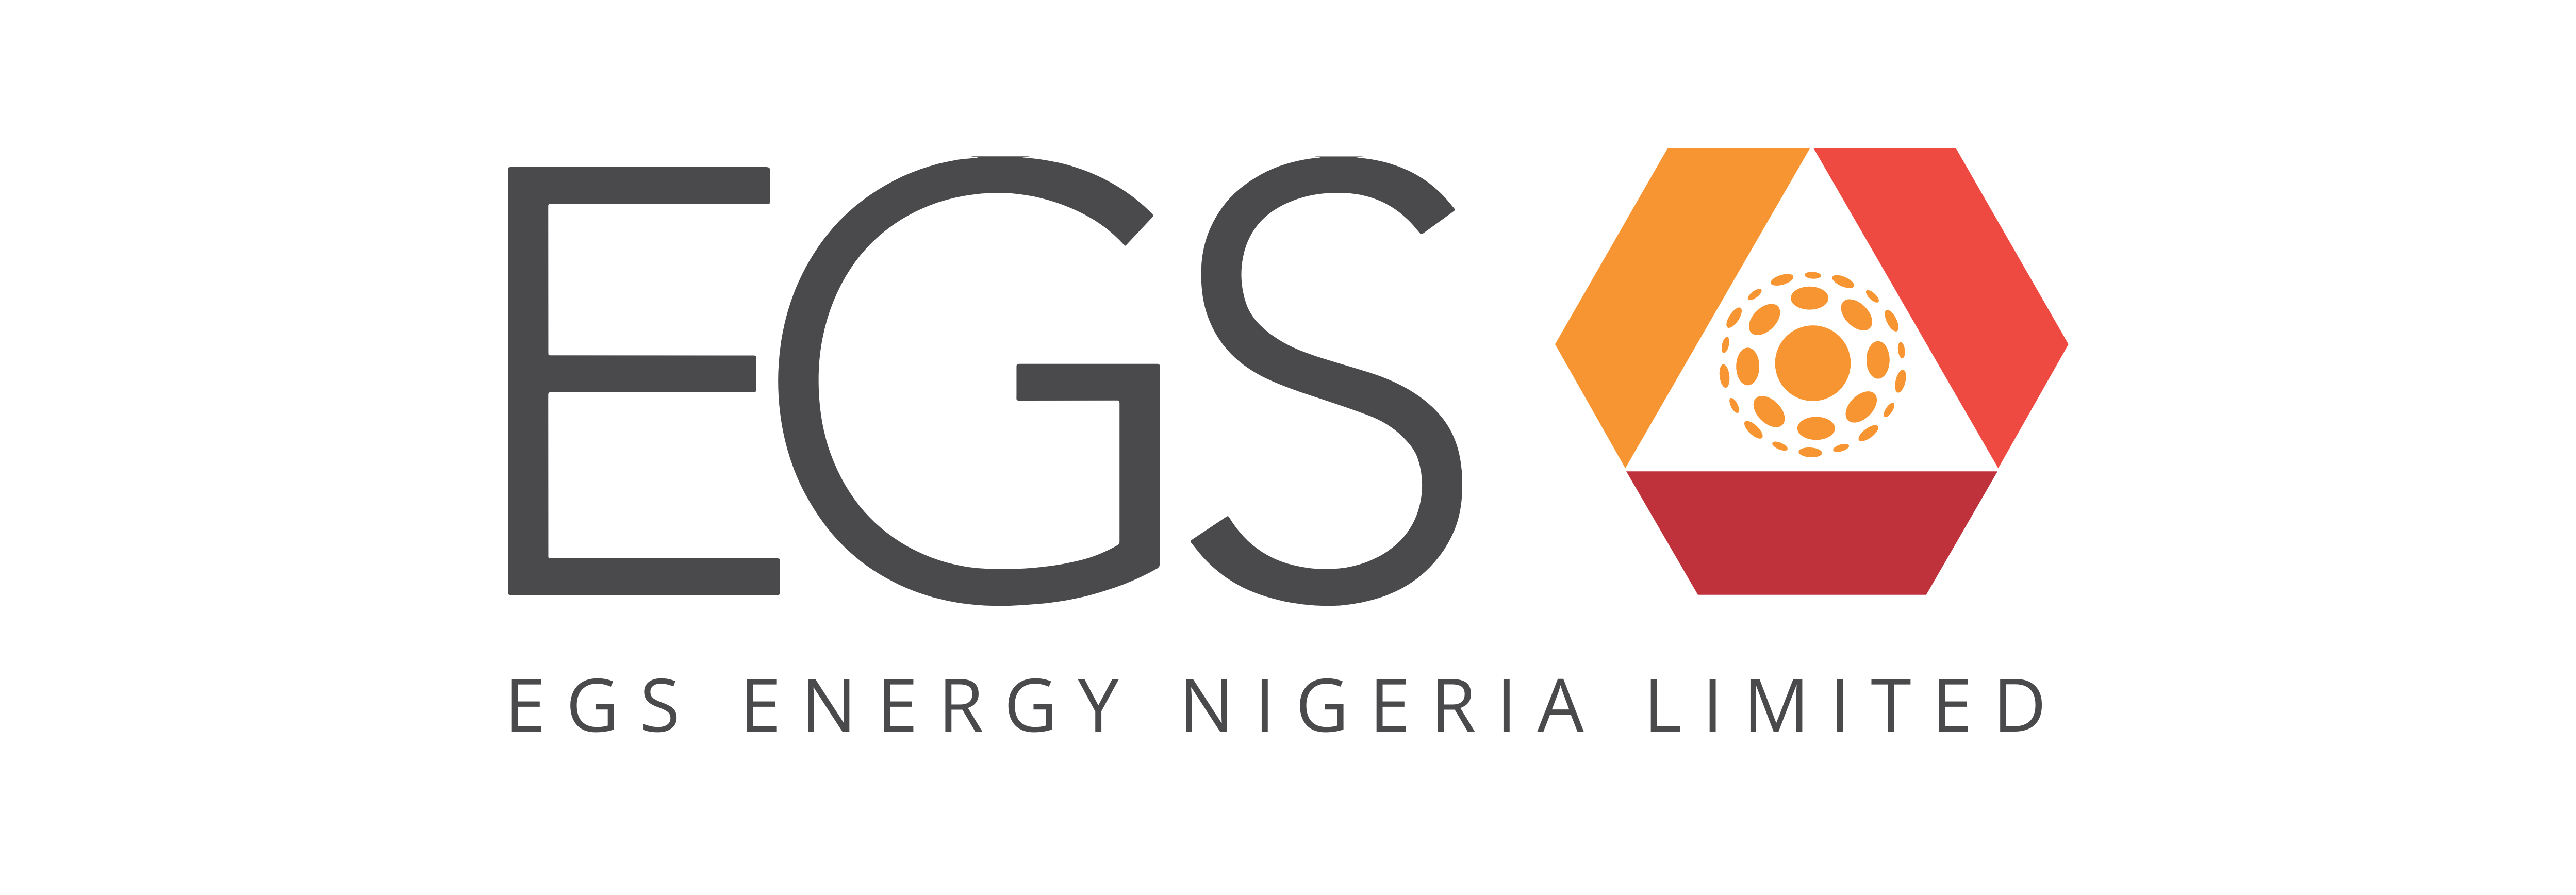 EGS ENERGY NIGERIA LIMITED New High Rs